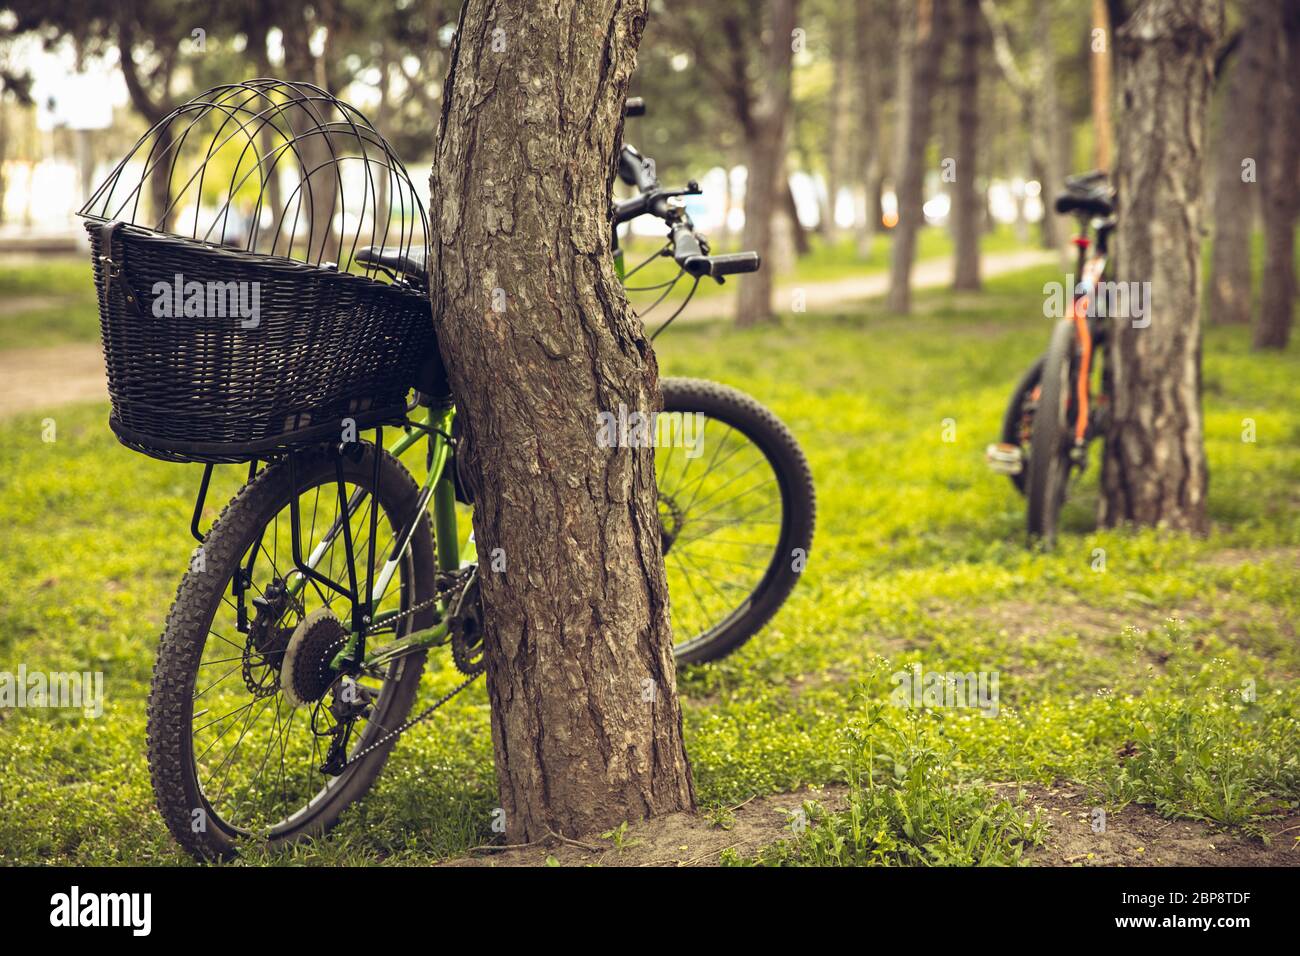 Bike left near tree with green nature around it. Countryside park, riding bikes, spending time healthy. Calm nature, spring day, positive emotions. Sportive, active leisure activity. Traveling. Stock Photo